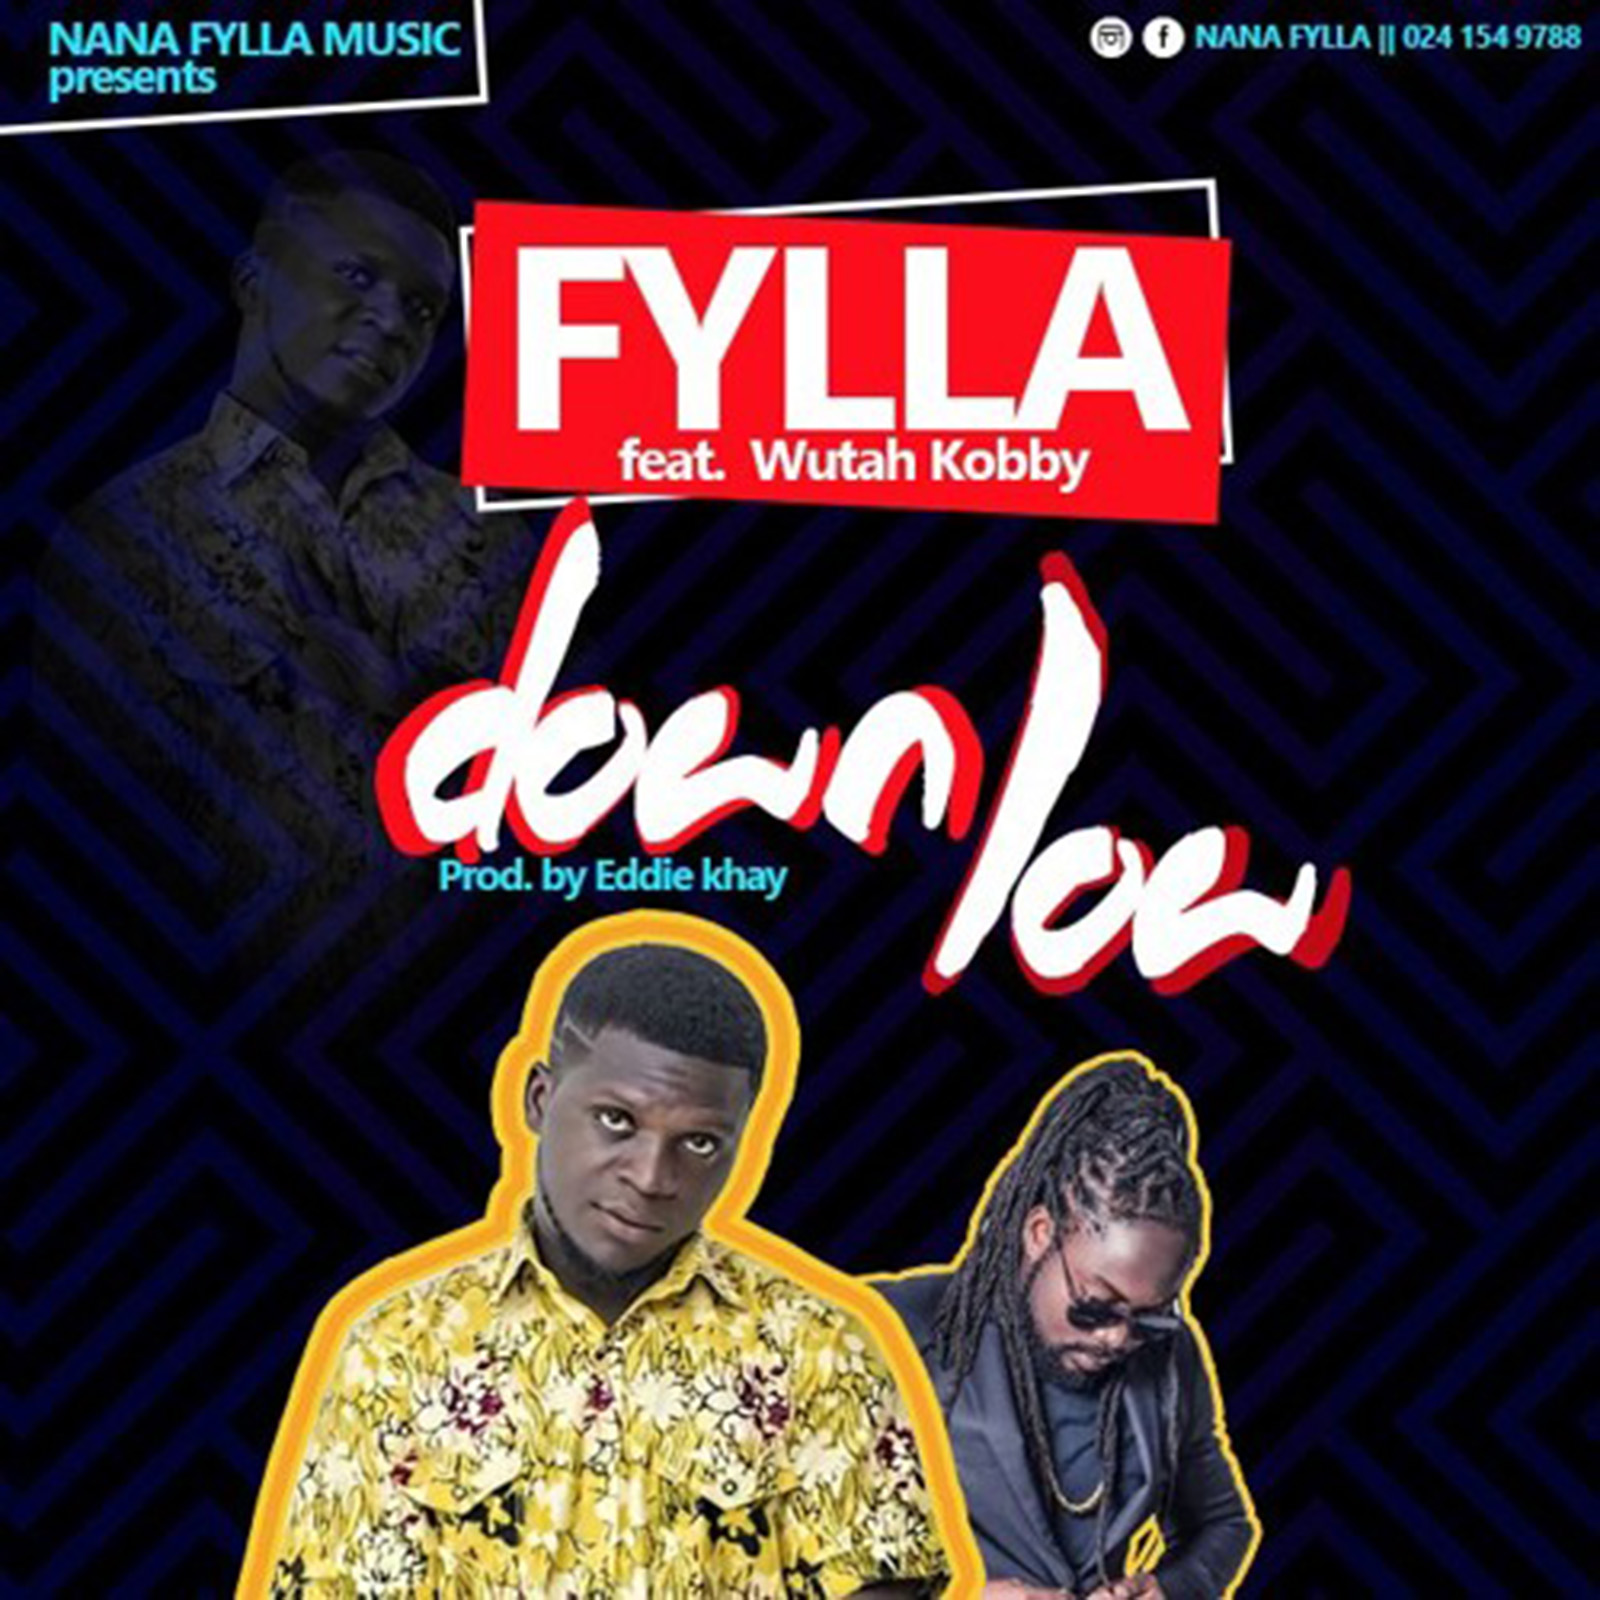 Down Low by Fylla feat. Wutah Kobby